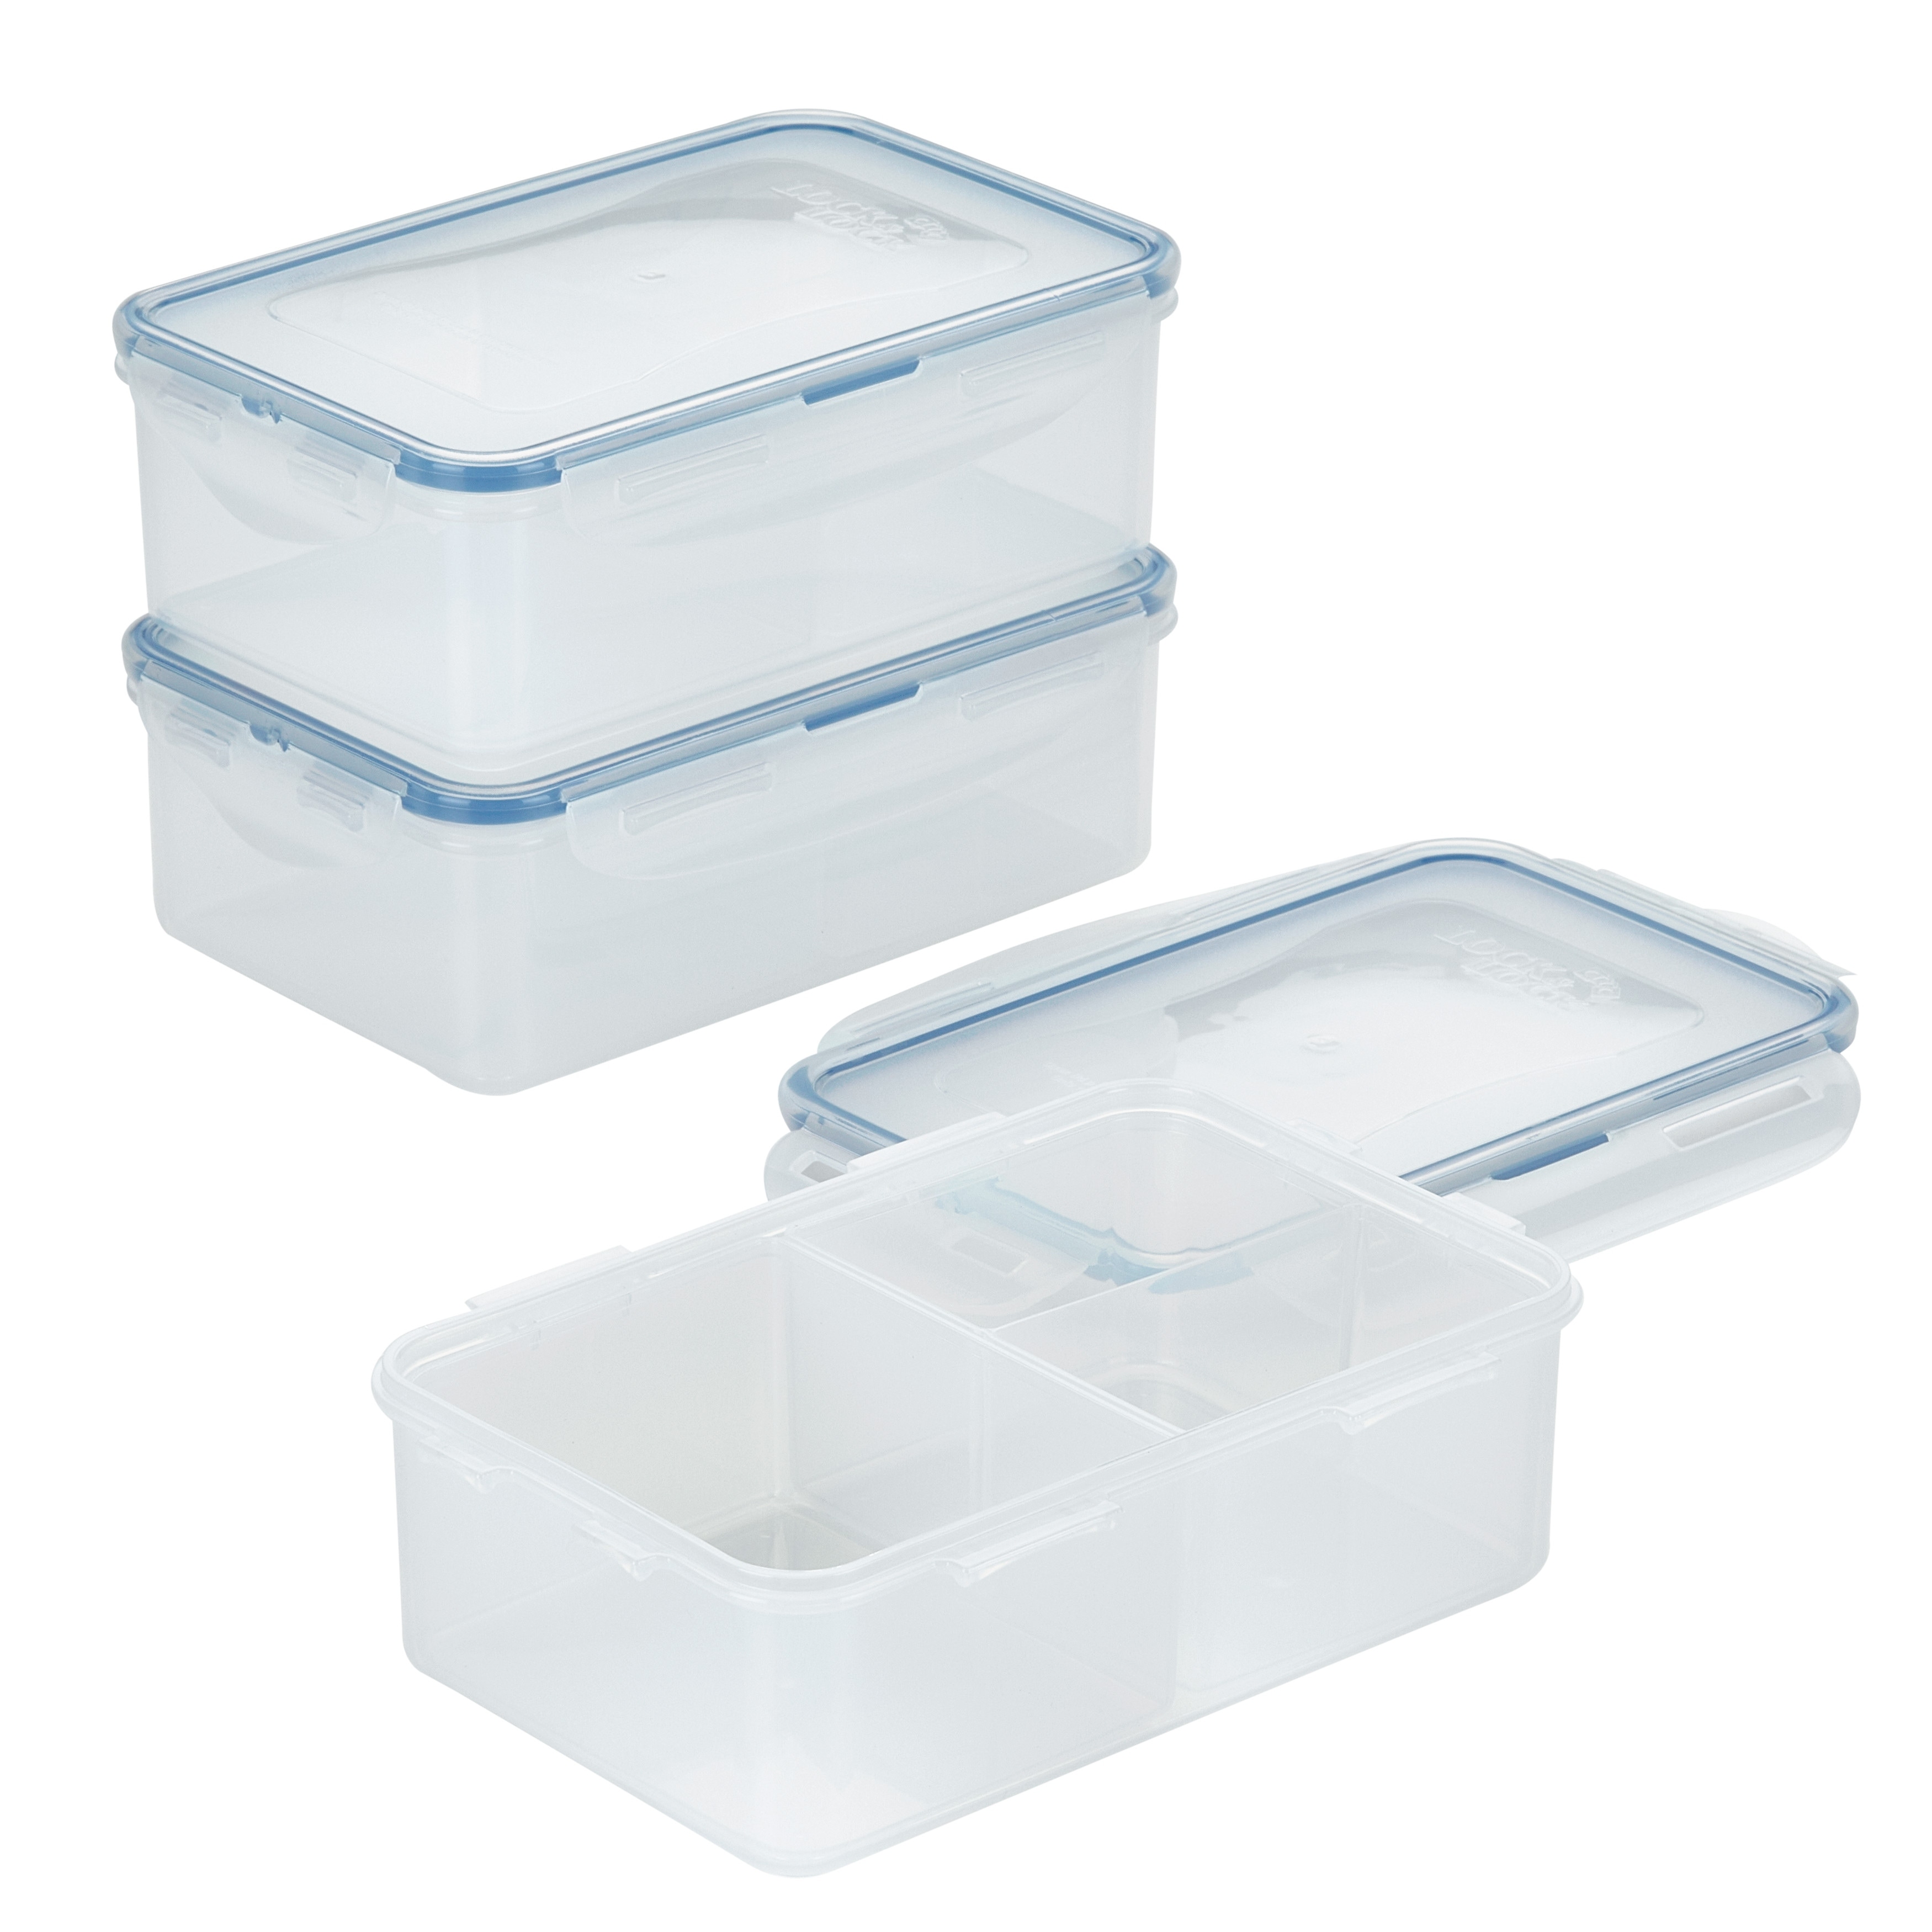 https://ak1.ostkcdn.com/images/products/is/images/direct/1878e7829ff2a98afd9ebfb4630b11ad450fe238/Easy-Essentials-Divided-Rectangular-Container%2C-34-oz%2C-Set-of-3.jpg